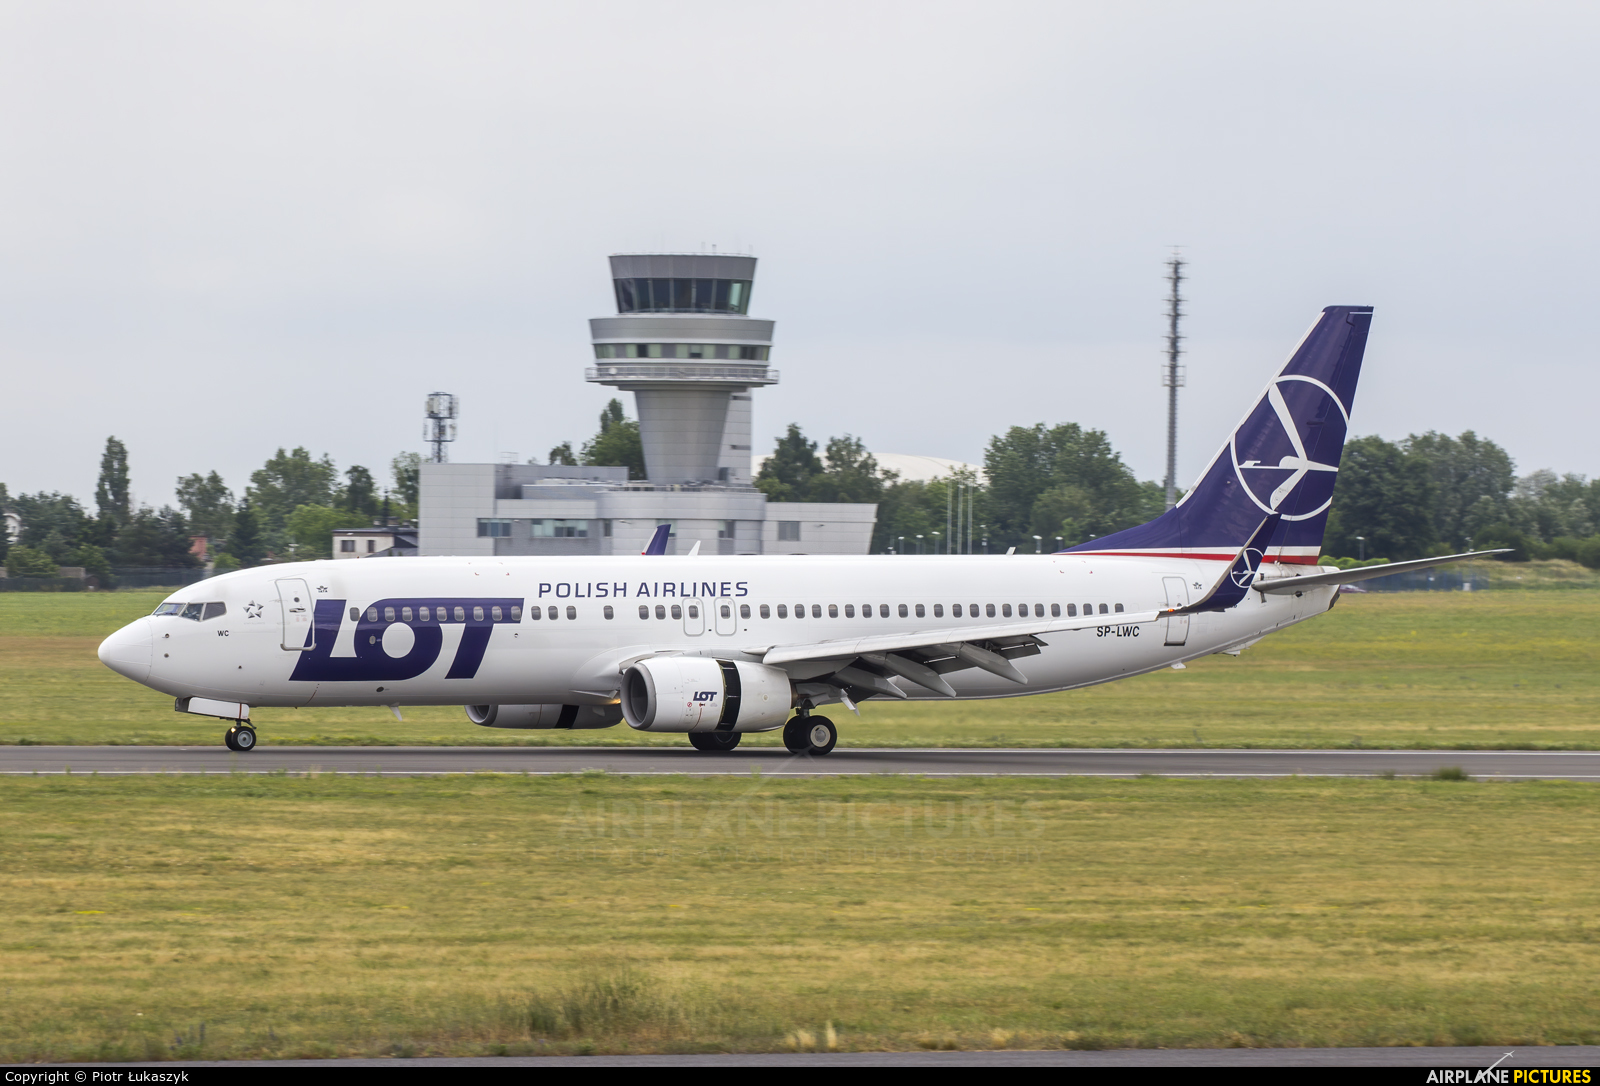 LOT - Polish Airlines SP-LWC aircraft at Poznań - Ławica